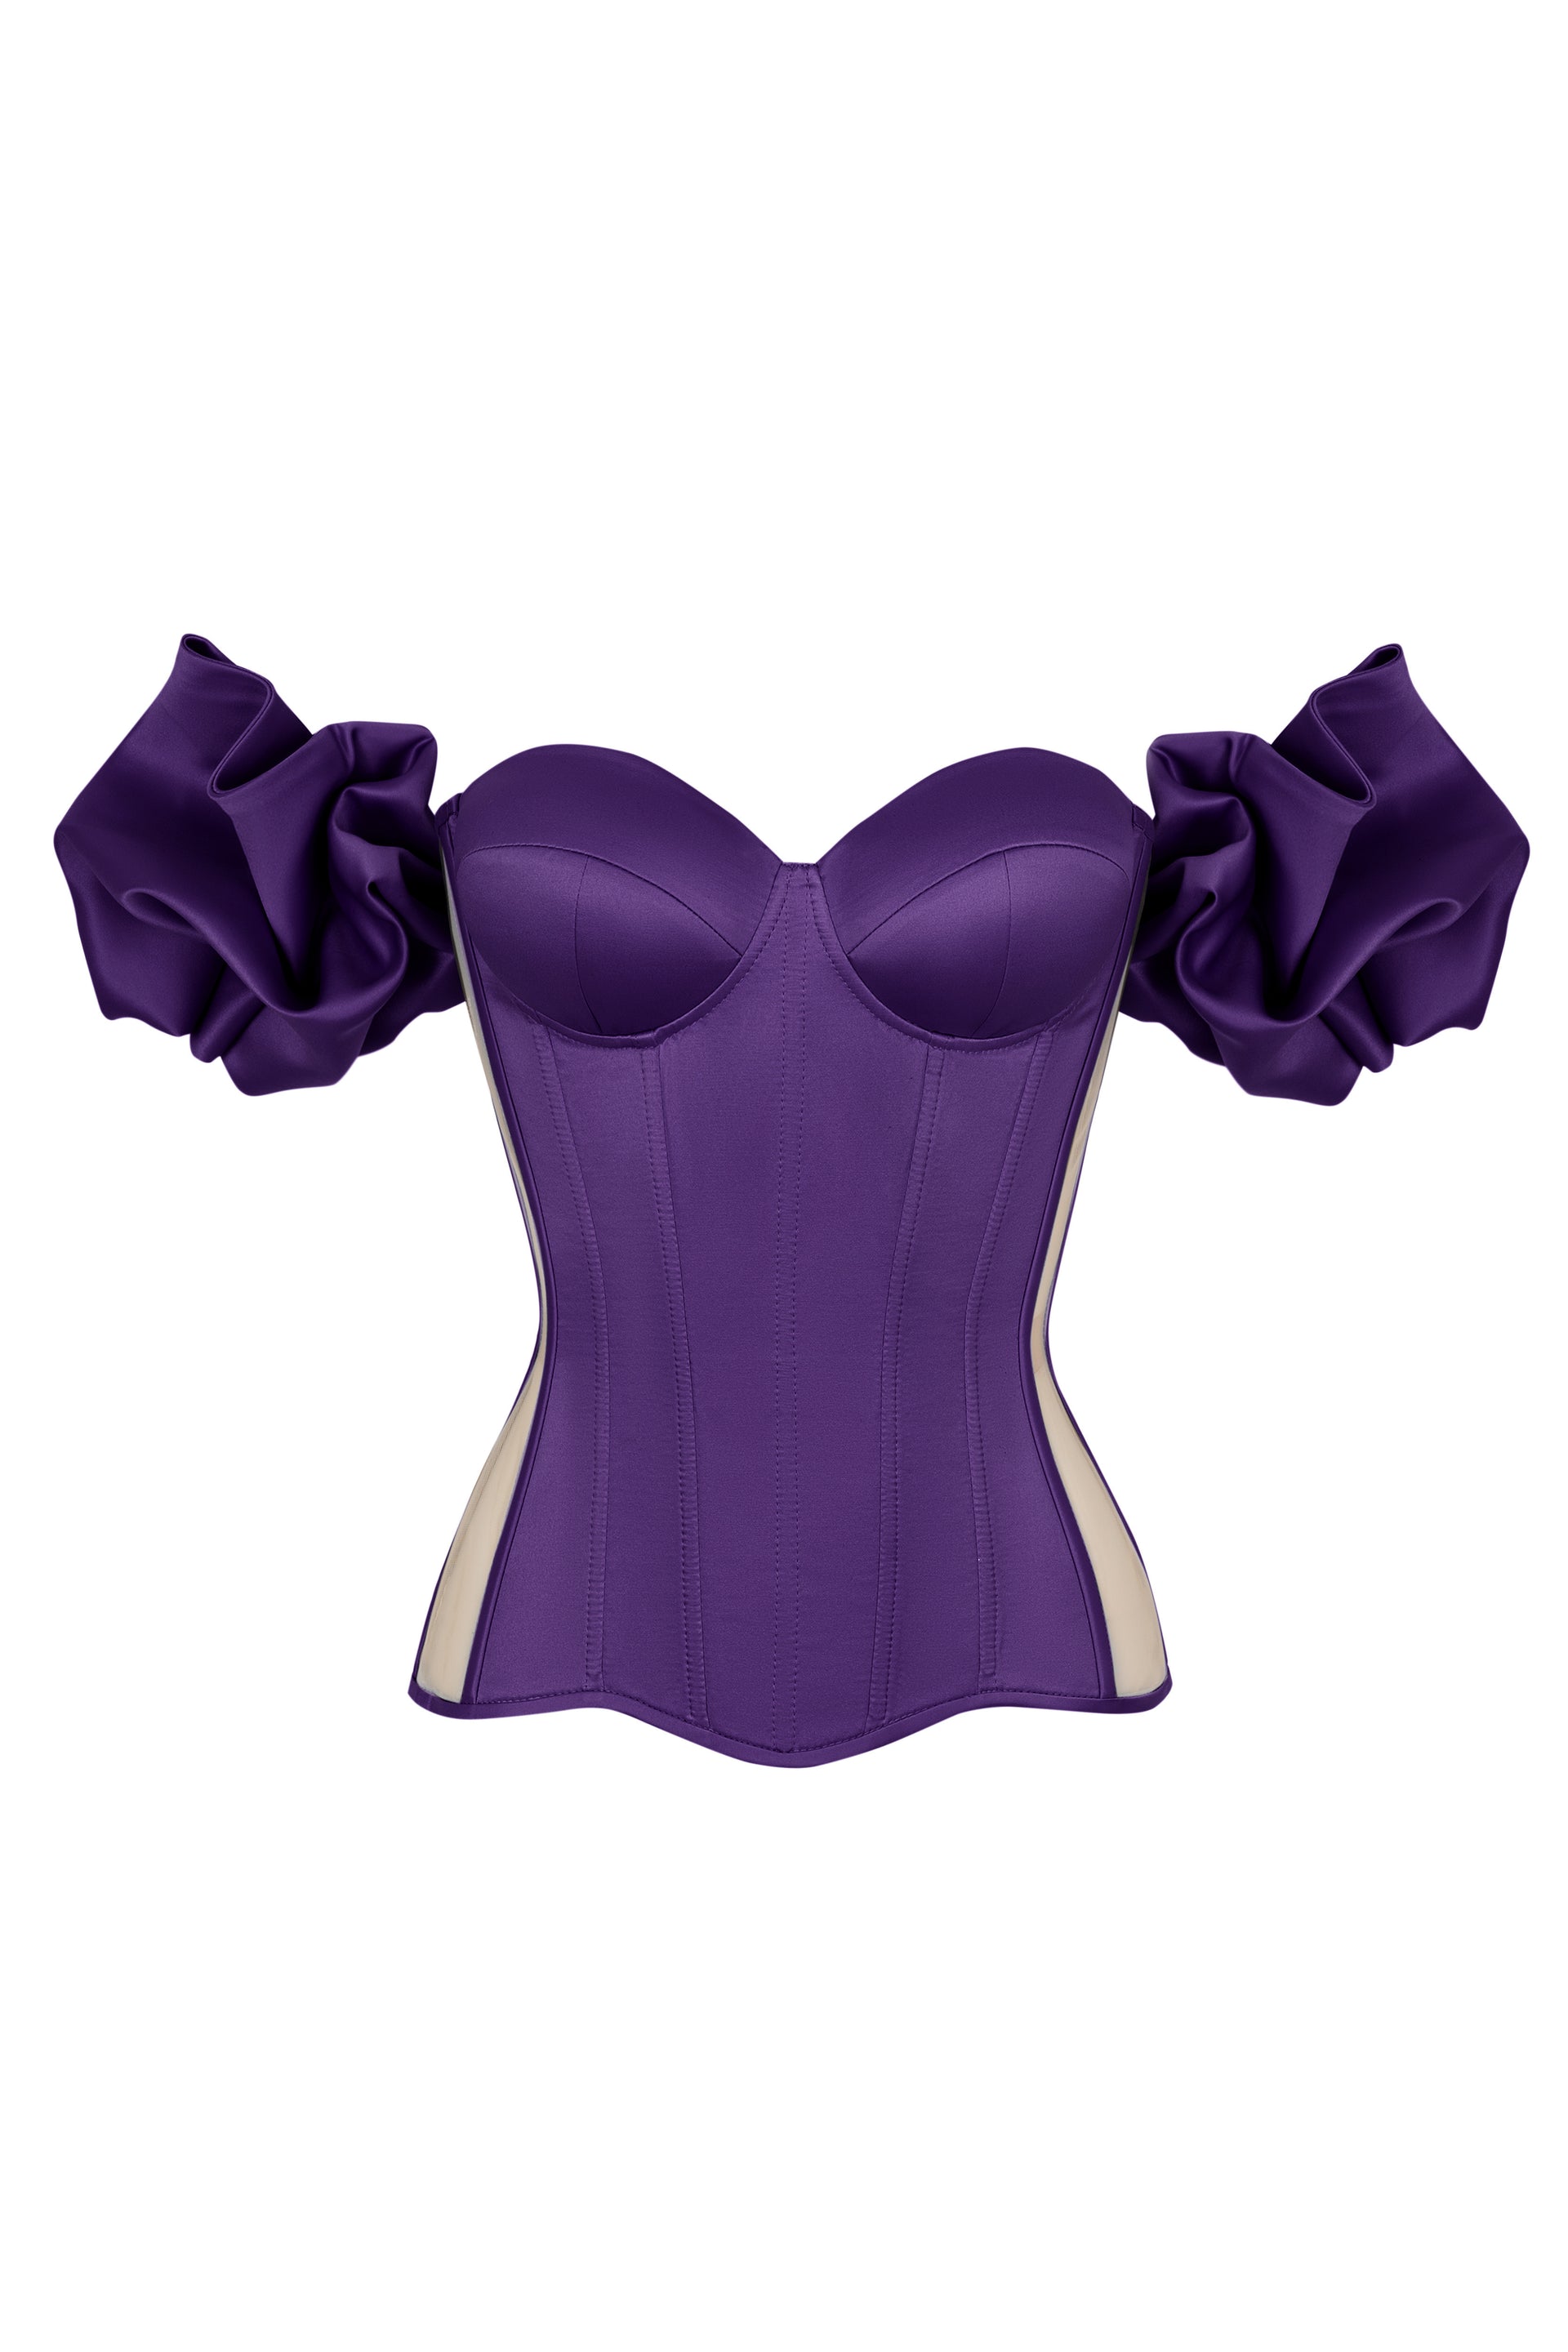 Purple satin corset with transparent back and detachable sleeves